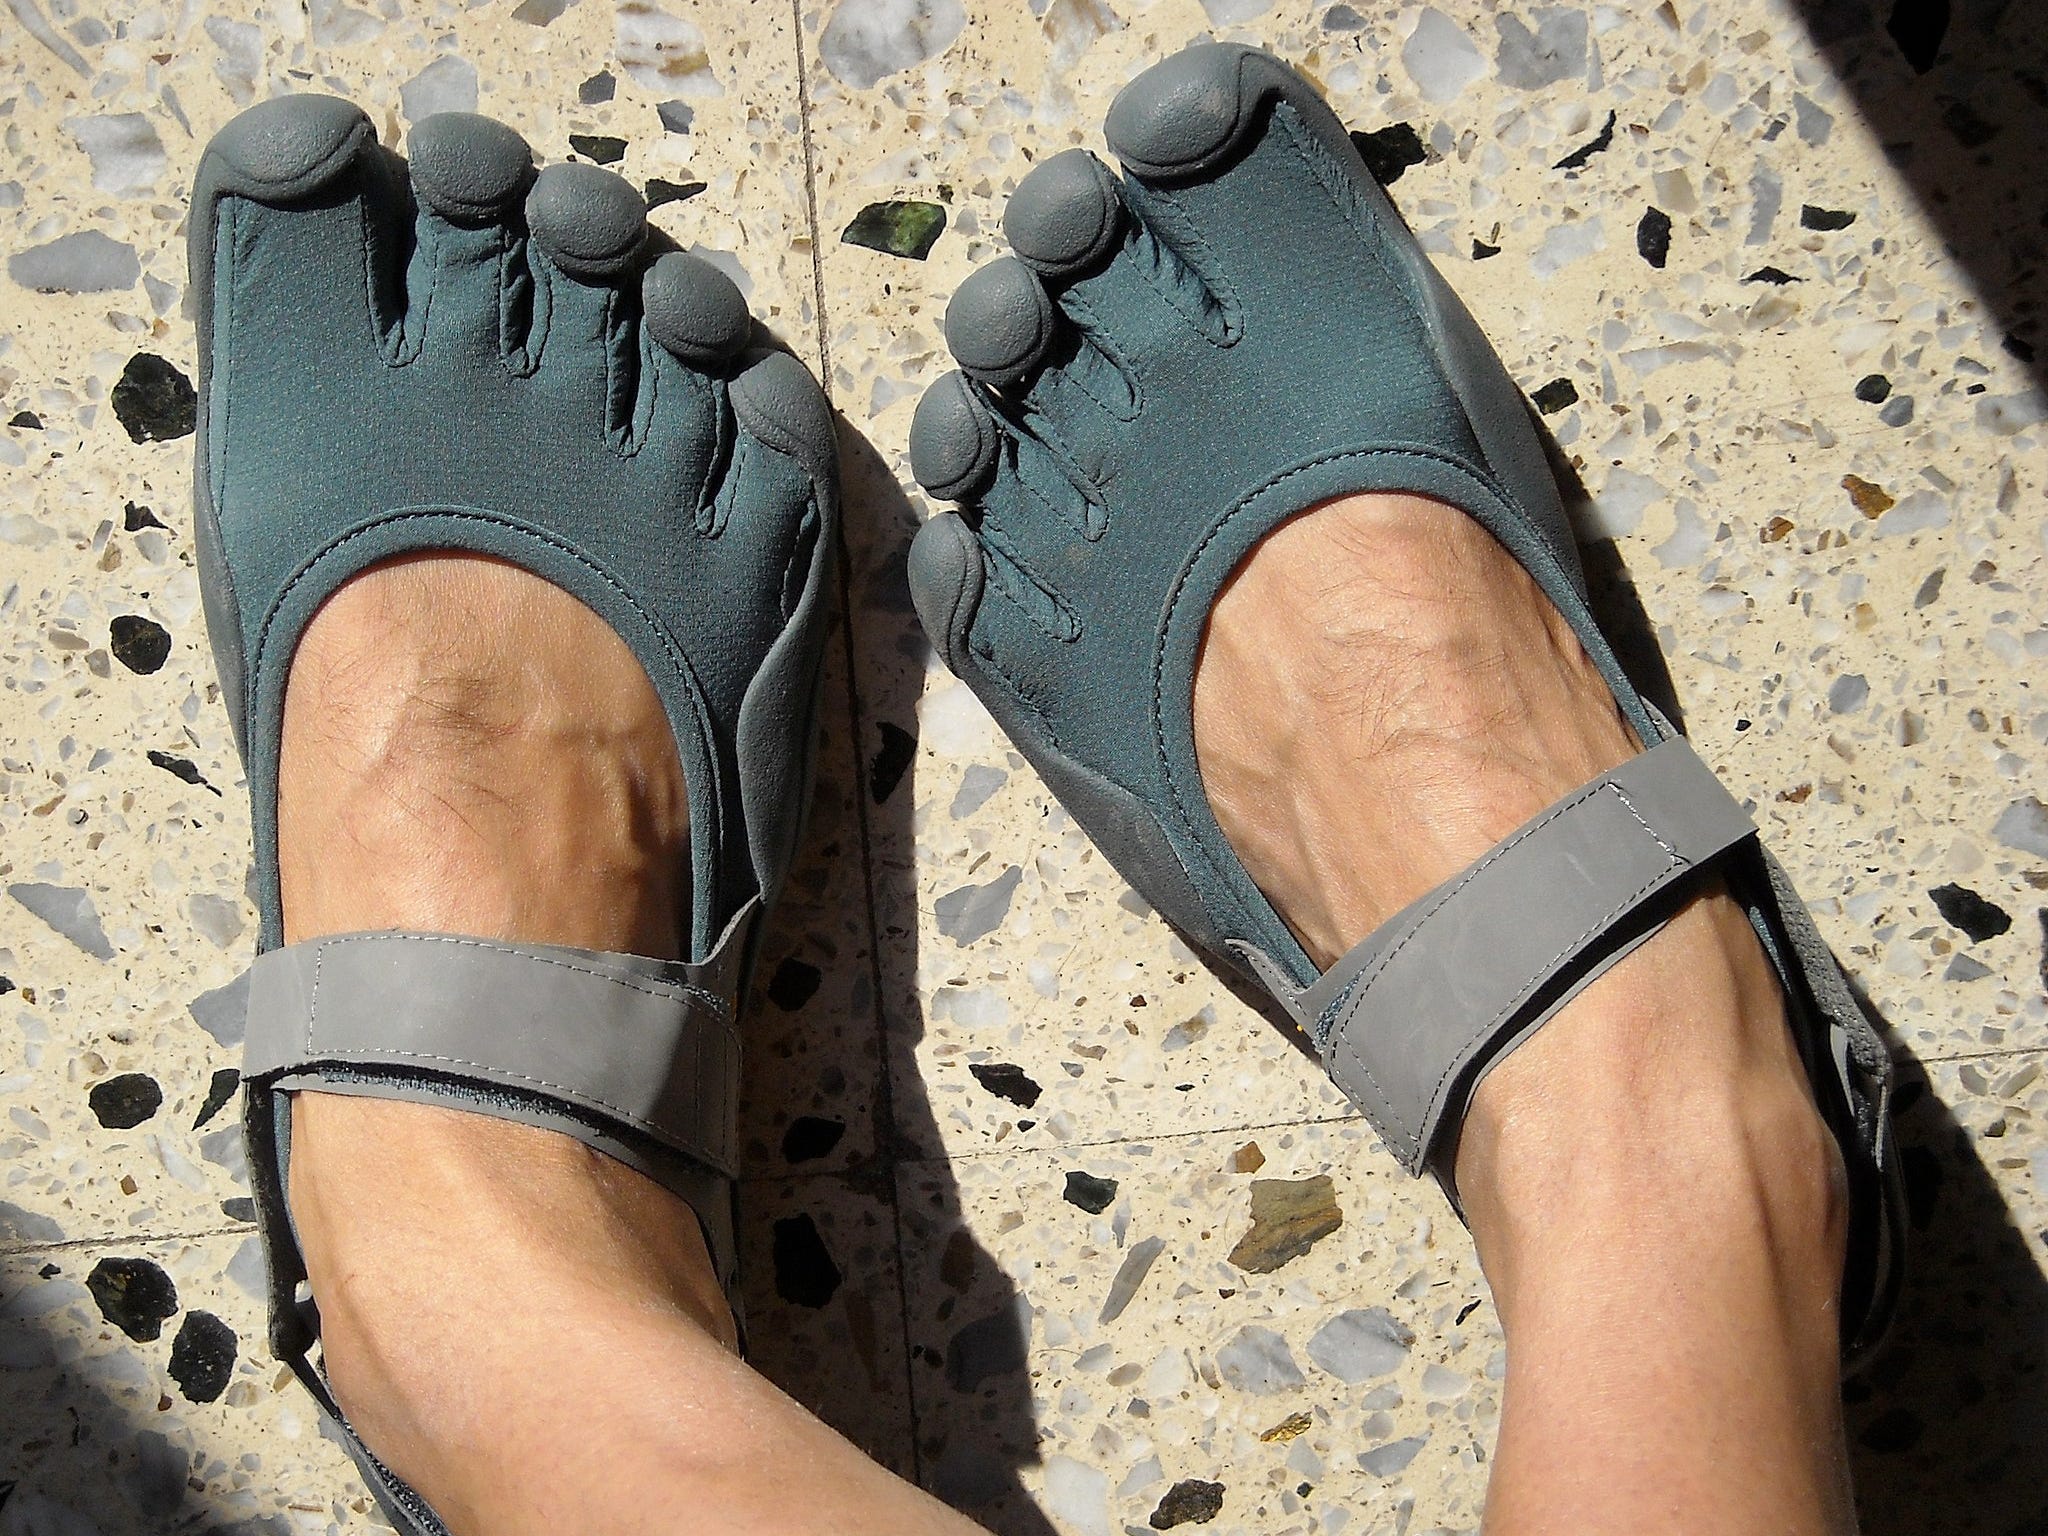 A pair of Vibram Five Finger minimalist shoes. (Wikimedia Commons)